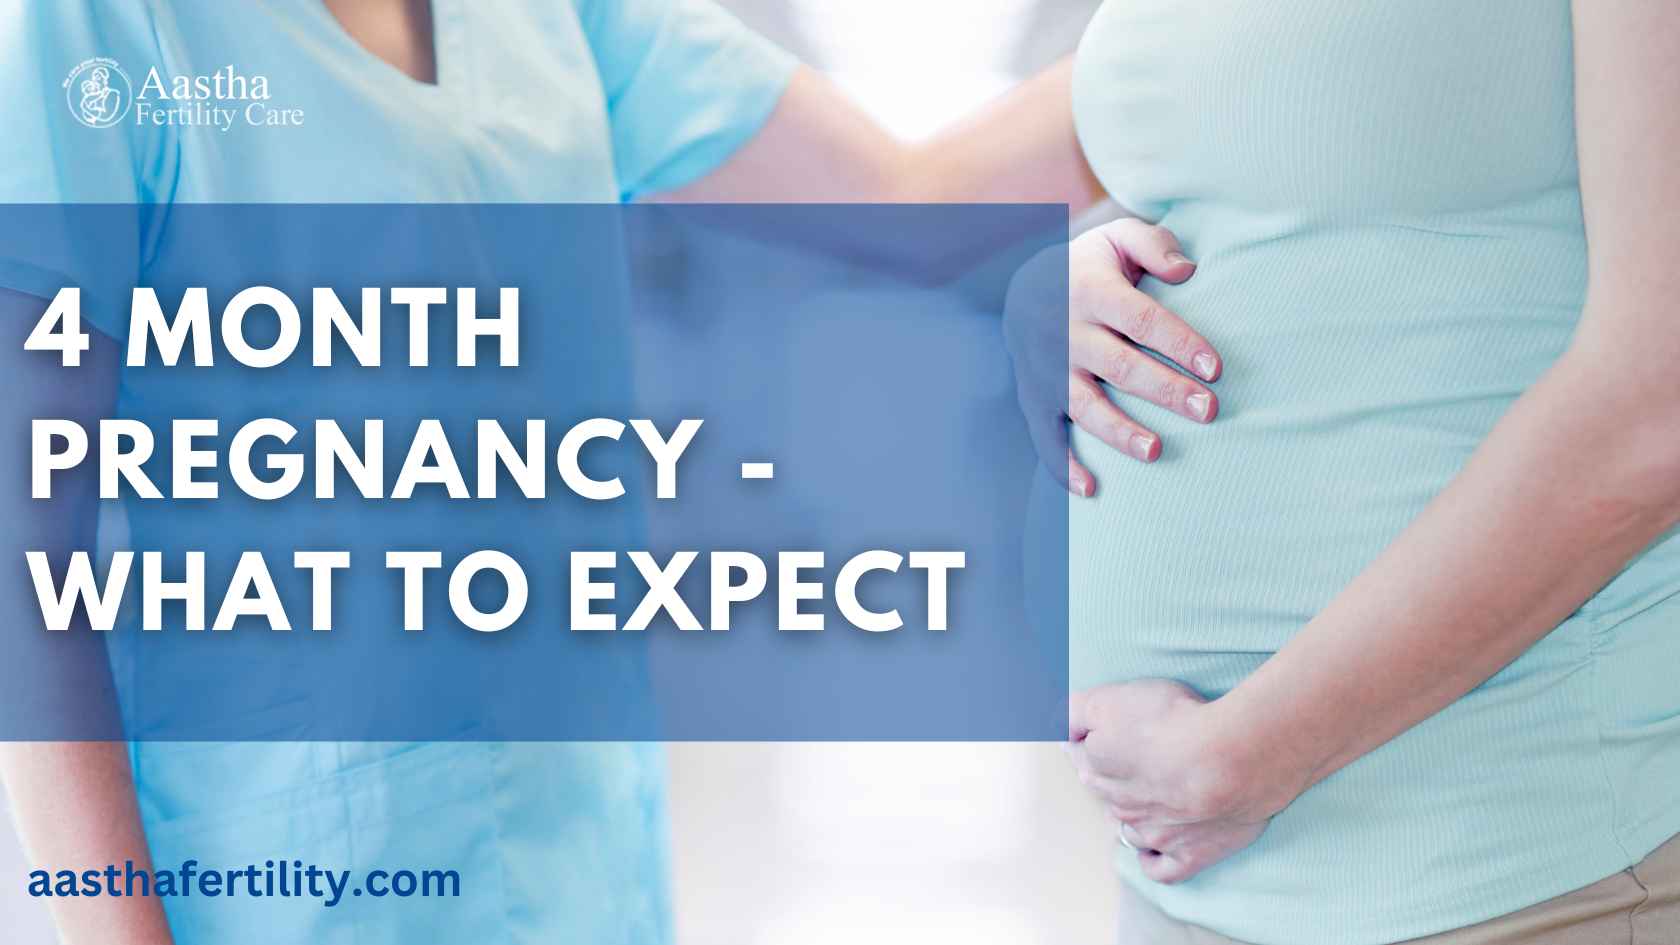 4 Month Pregnancy - What to Expect